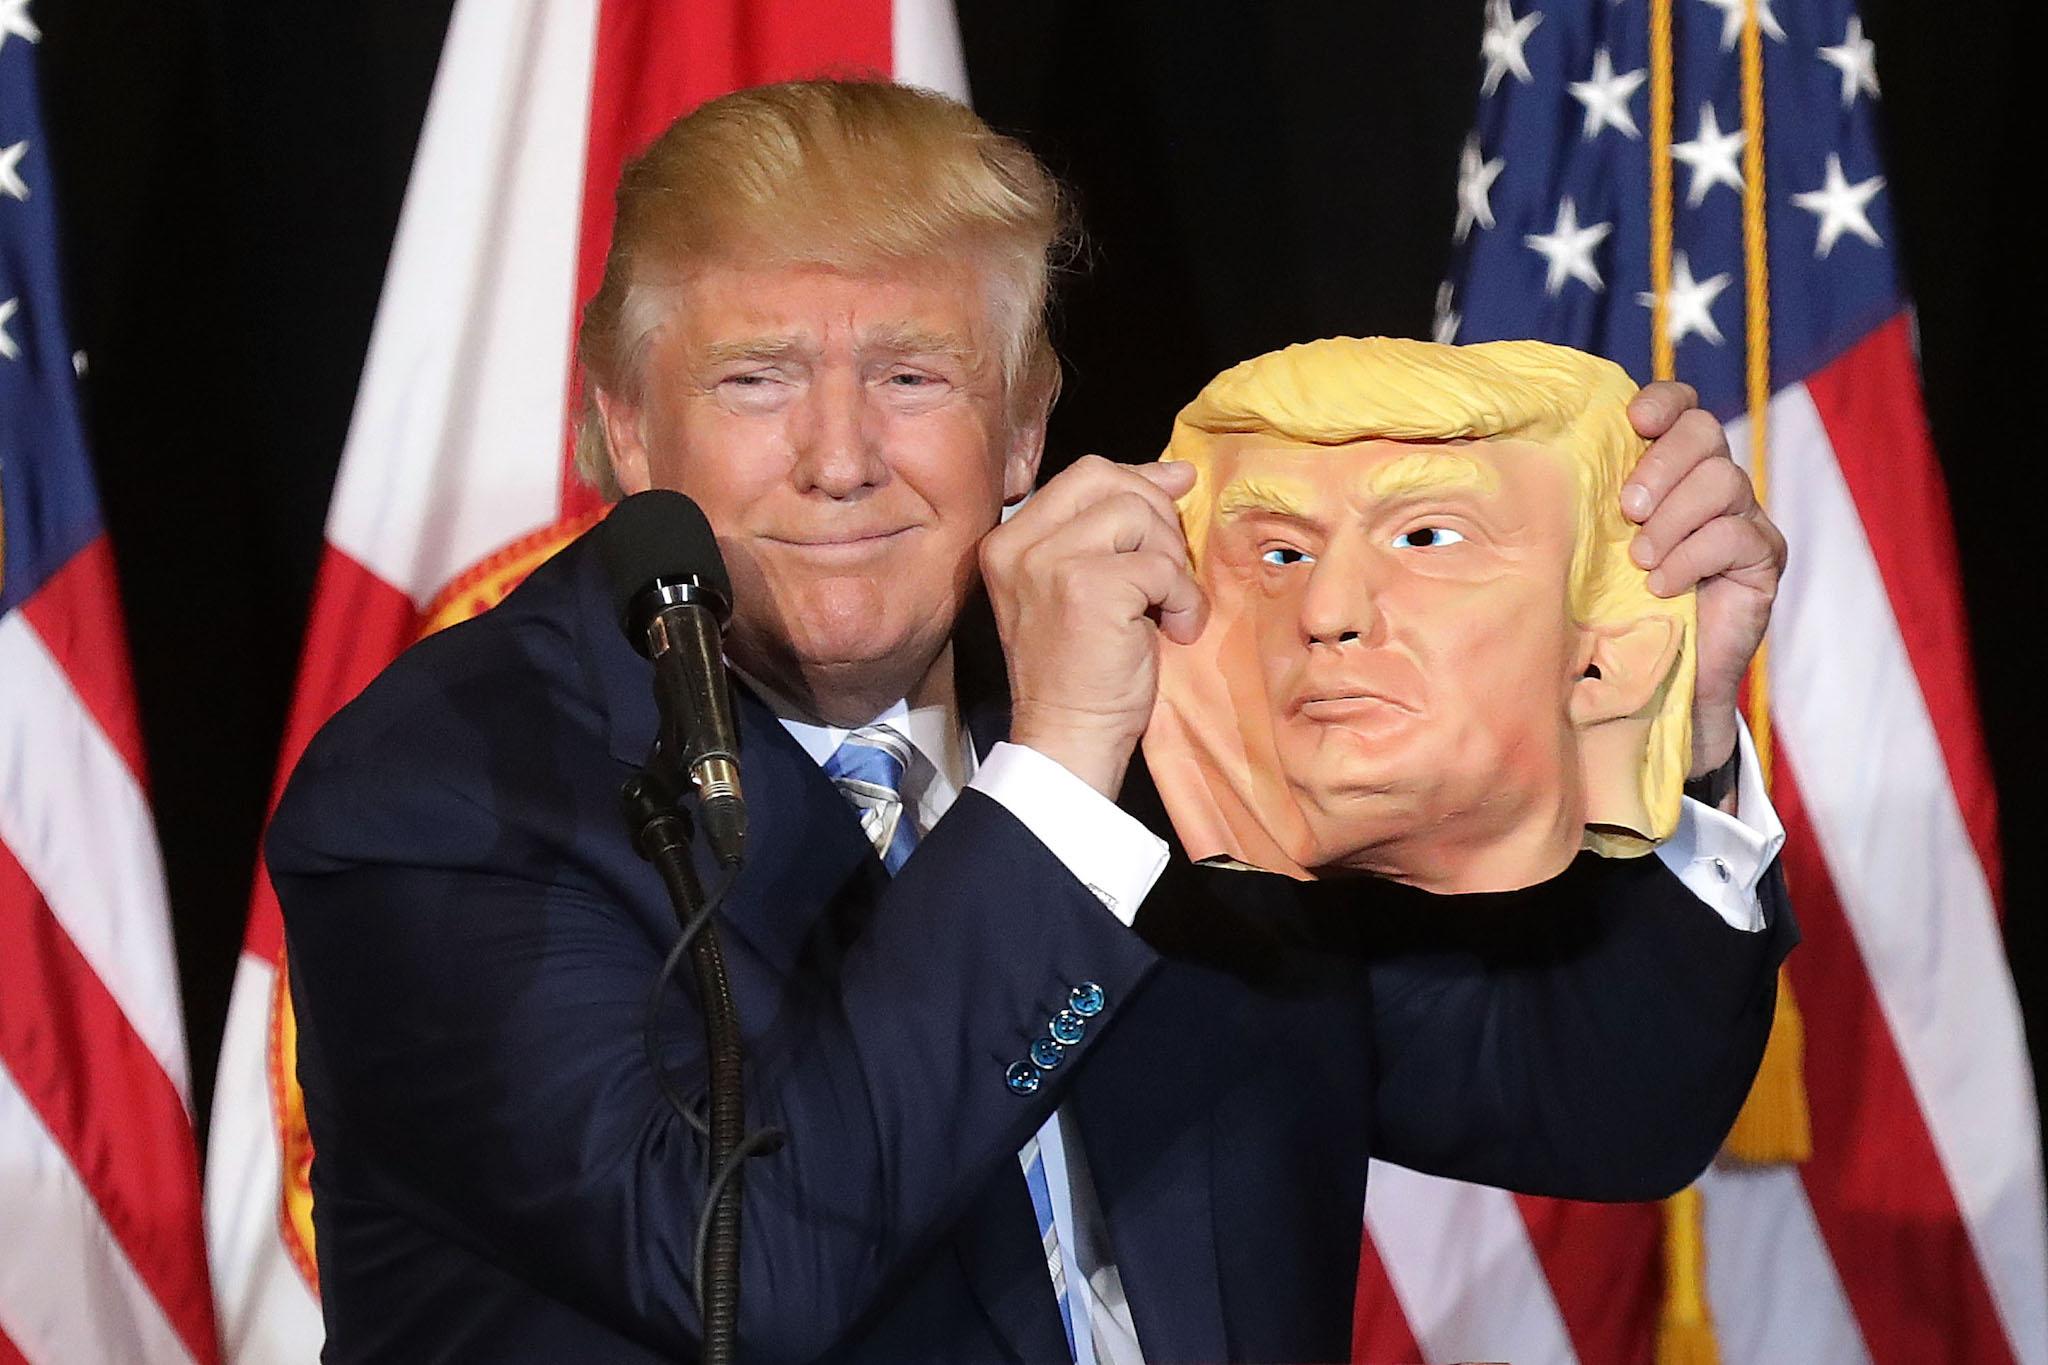 Republican presidential nominee Donald Trump holds up a rubber mask of himself during a campaign rally in the Robarts Arena at the Sarasota Fairgrounds November 7, 2016 in Sarasota, Florida